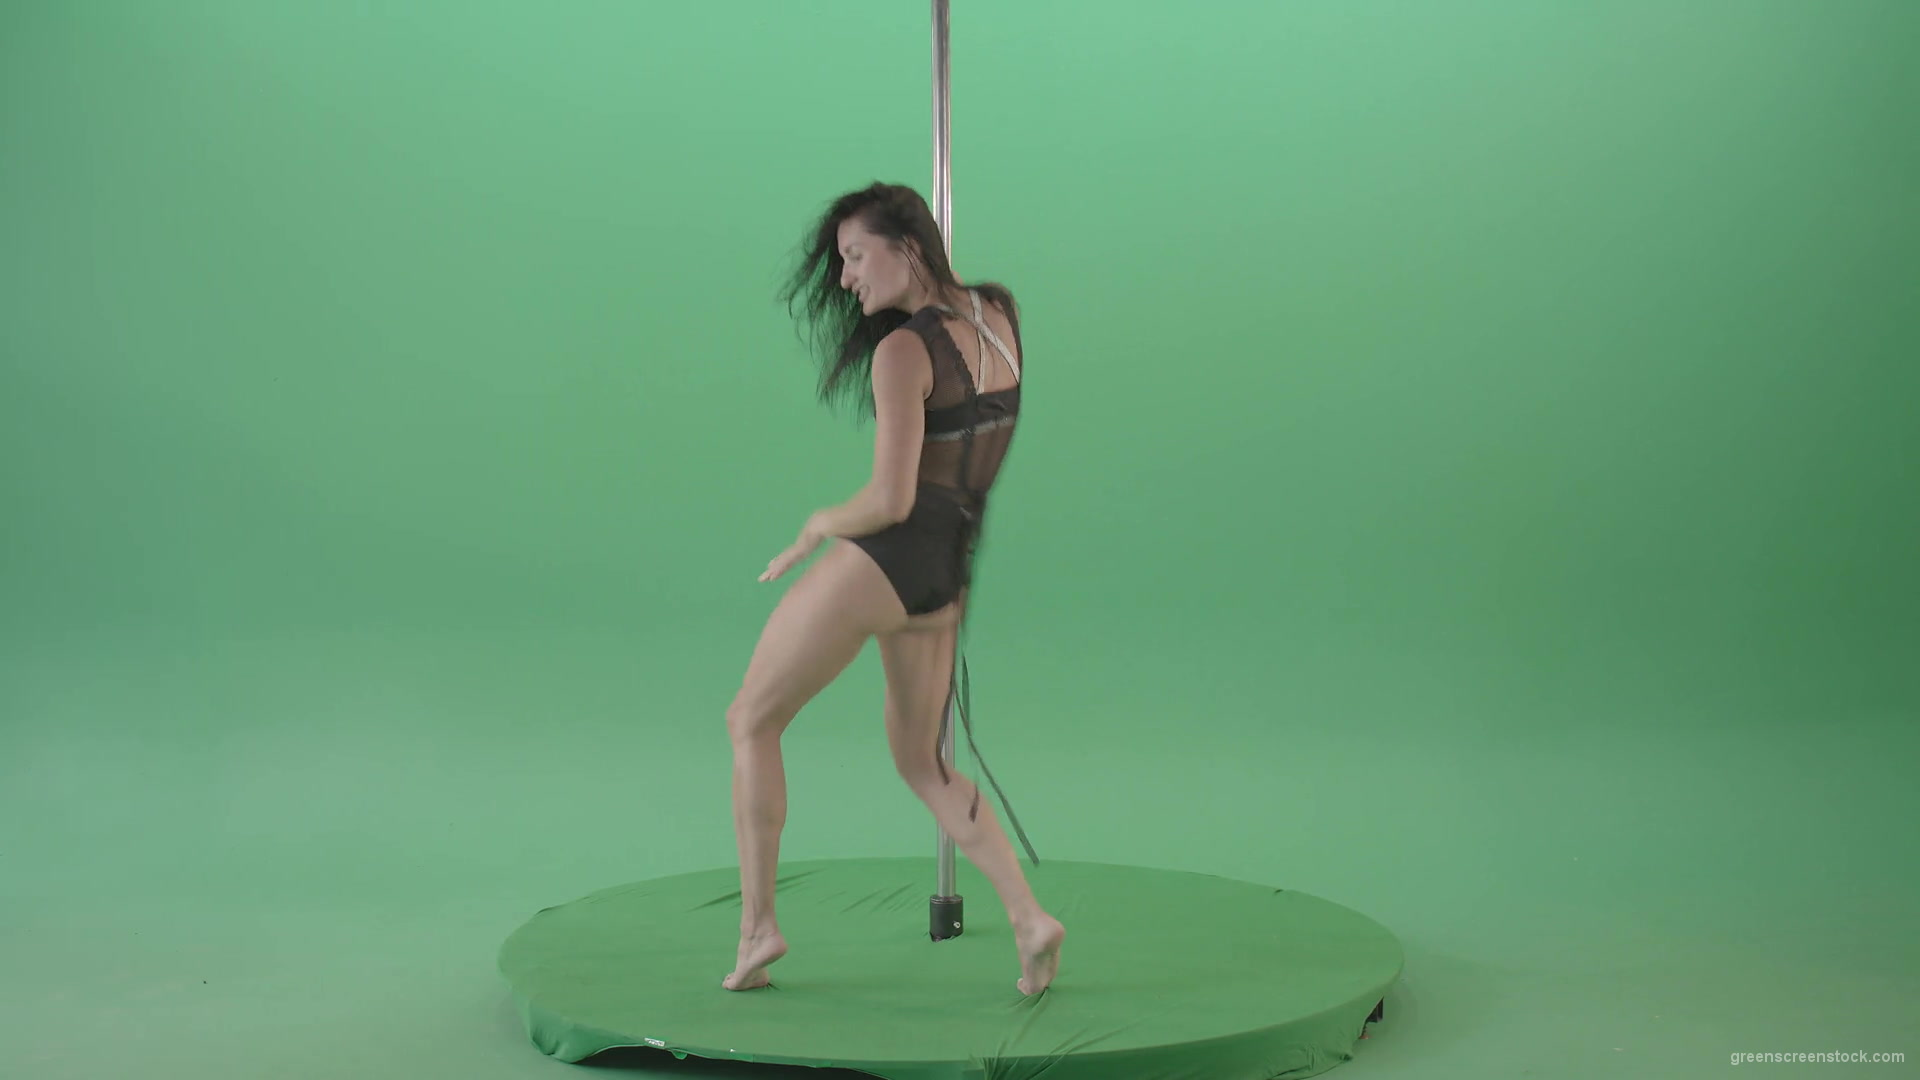 Sexy-girl-in-Lingerie-wear-dancing-strip-pole-dance-isolated-on-green-screen-4K-Video-Footage-1920_002 Green Screen Stock